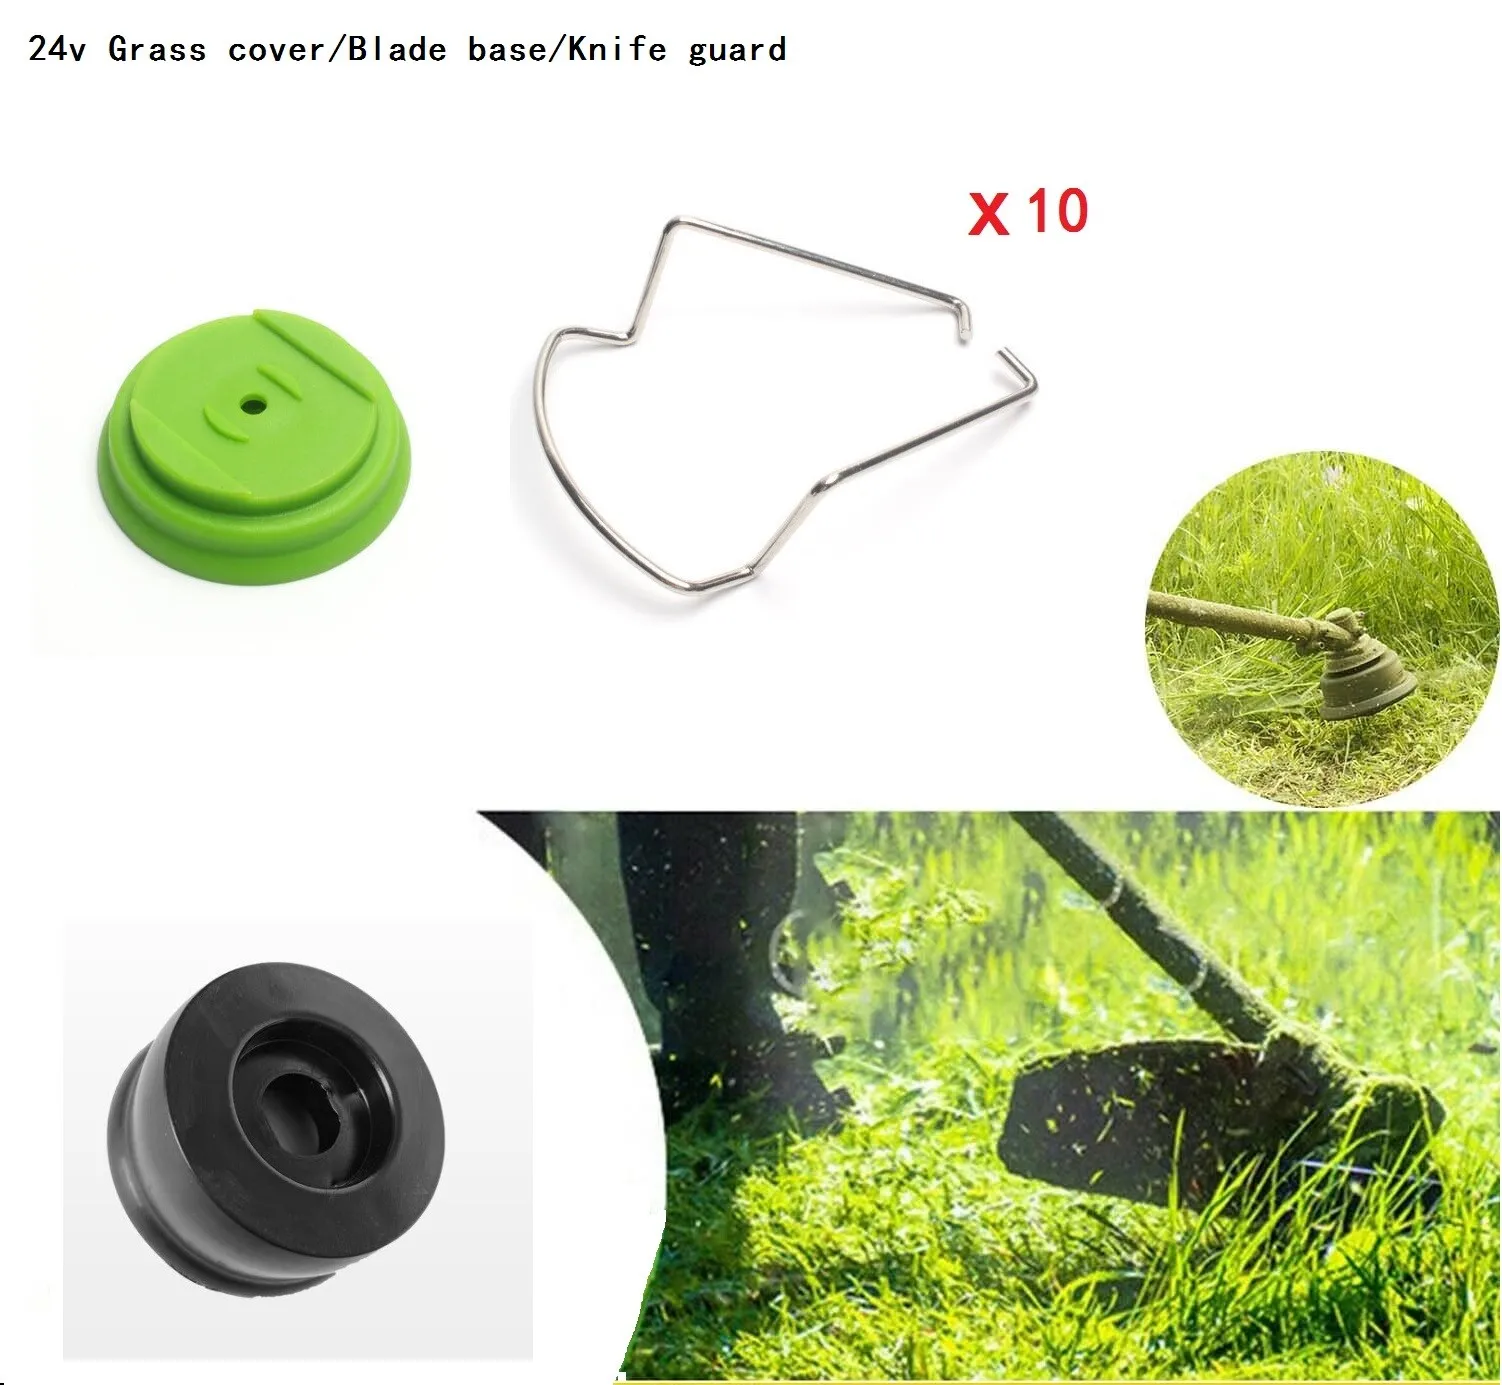 

Electric Lawn Mower Knives 21V Wireless Lawn Mower Charging Kit Trimmers Grass Cover Base Power Garden Tool Accessories